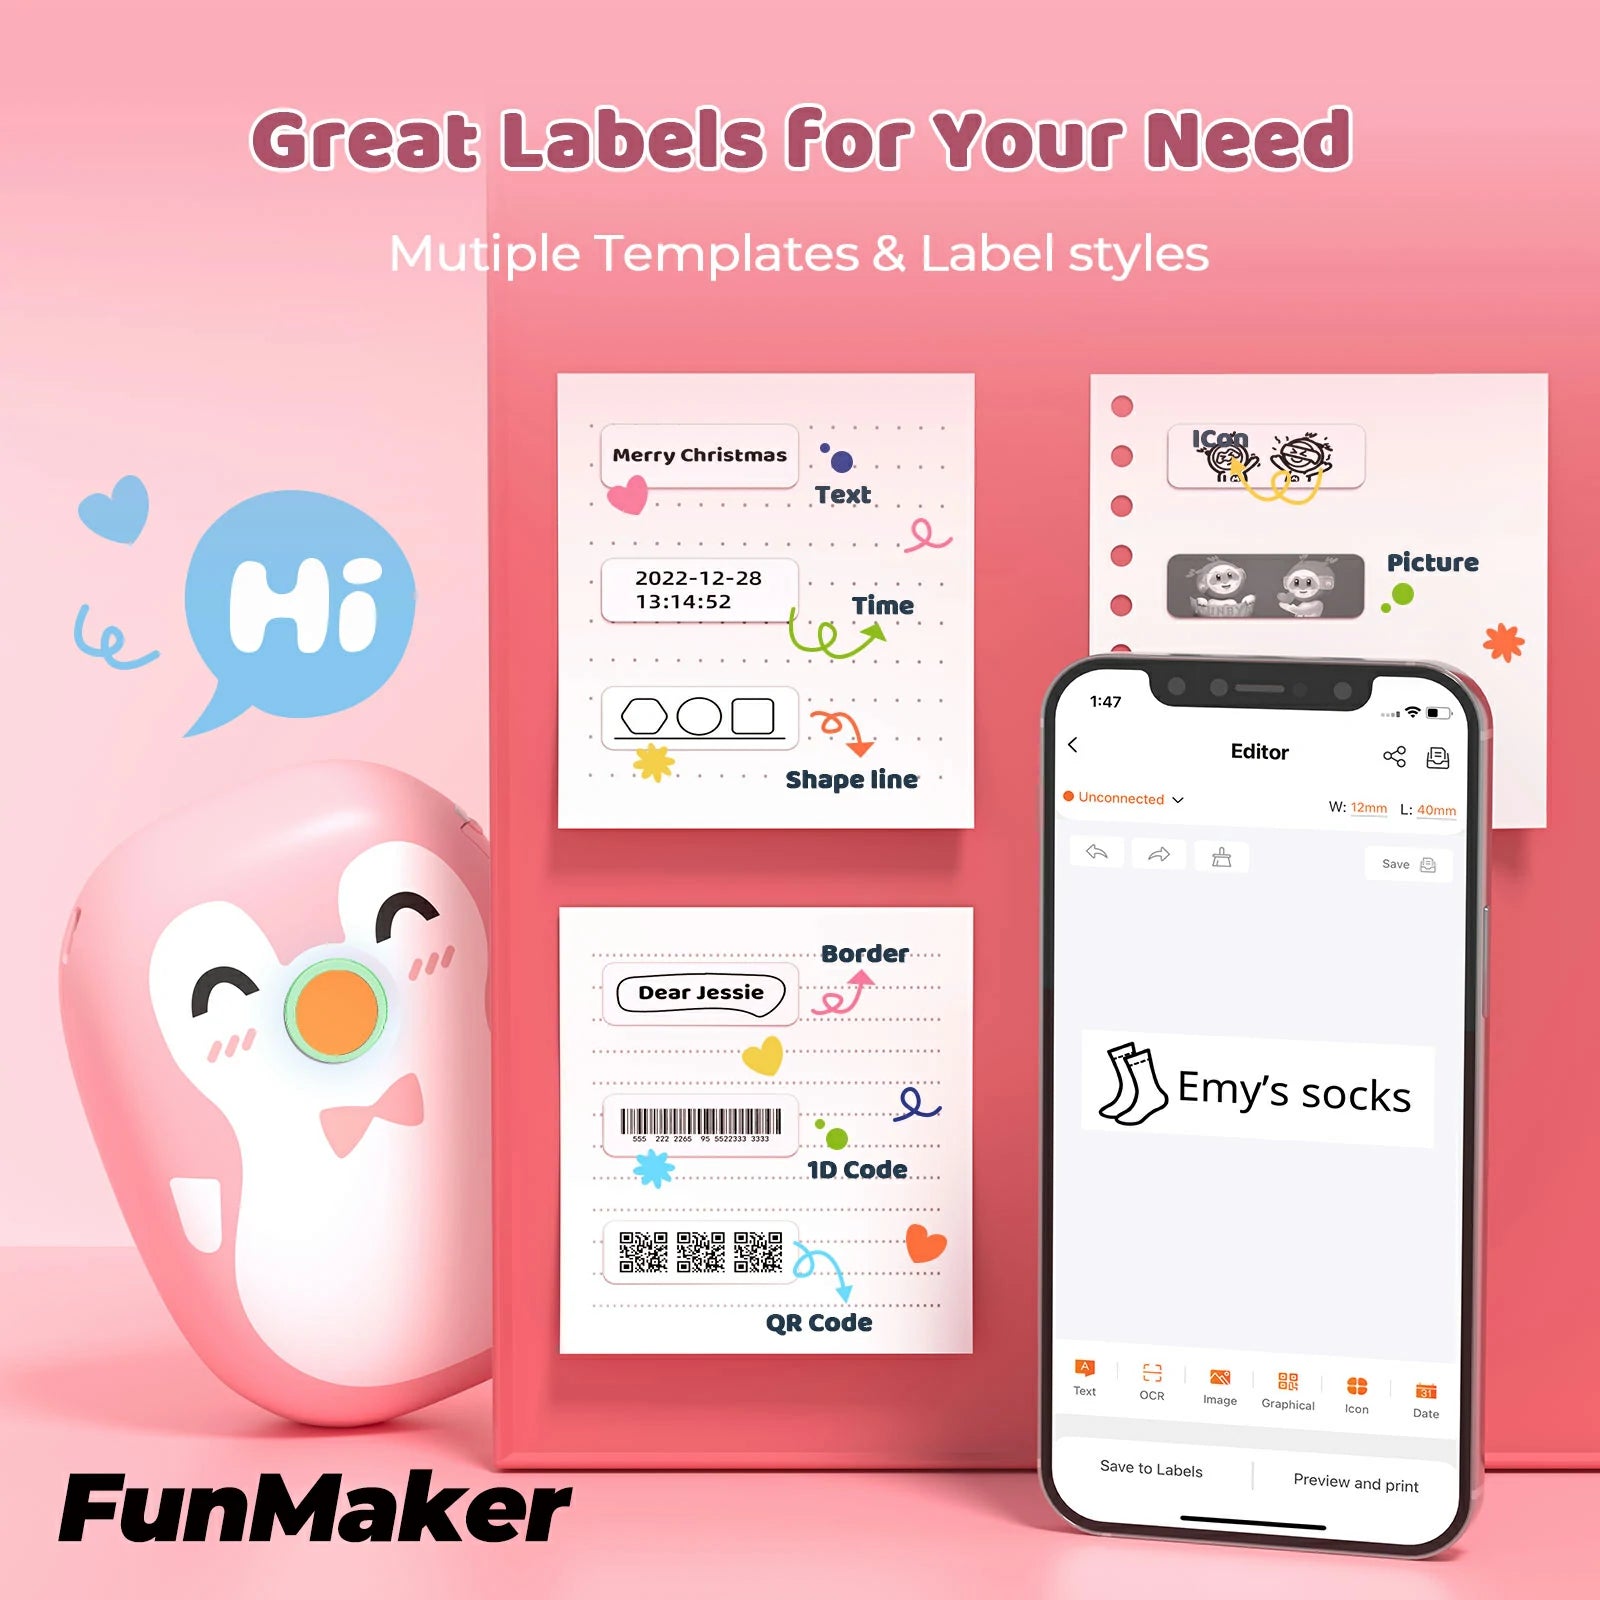 MUNBYN pink Penguin Portable Bluetooth Label Maker Machine has multiple templates and label styles.